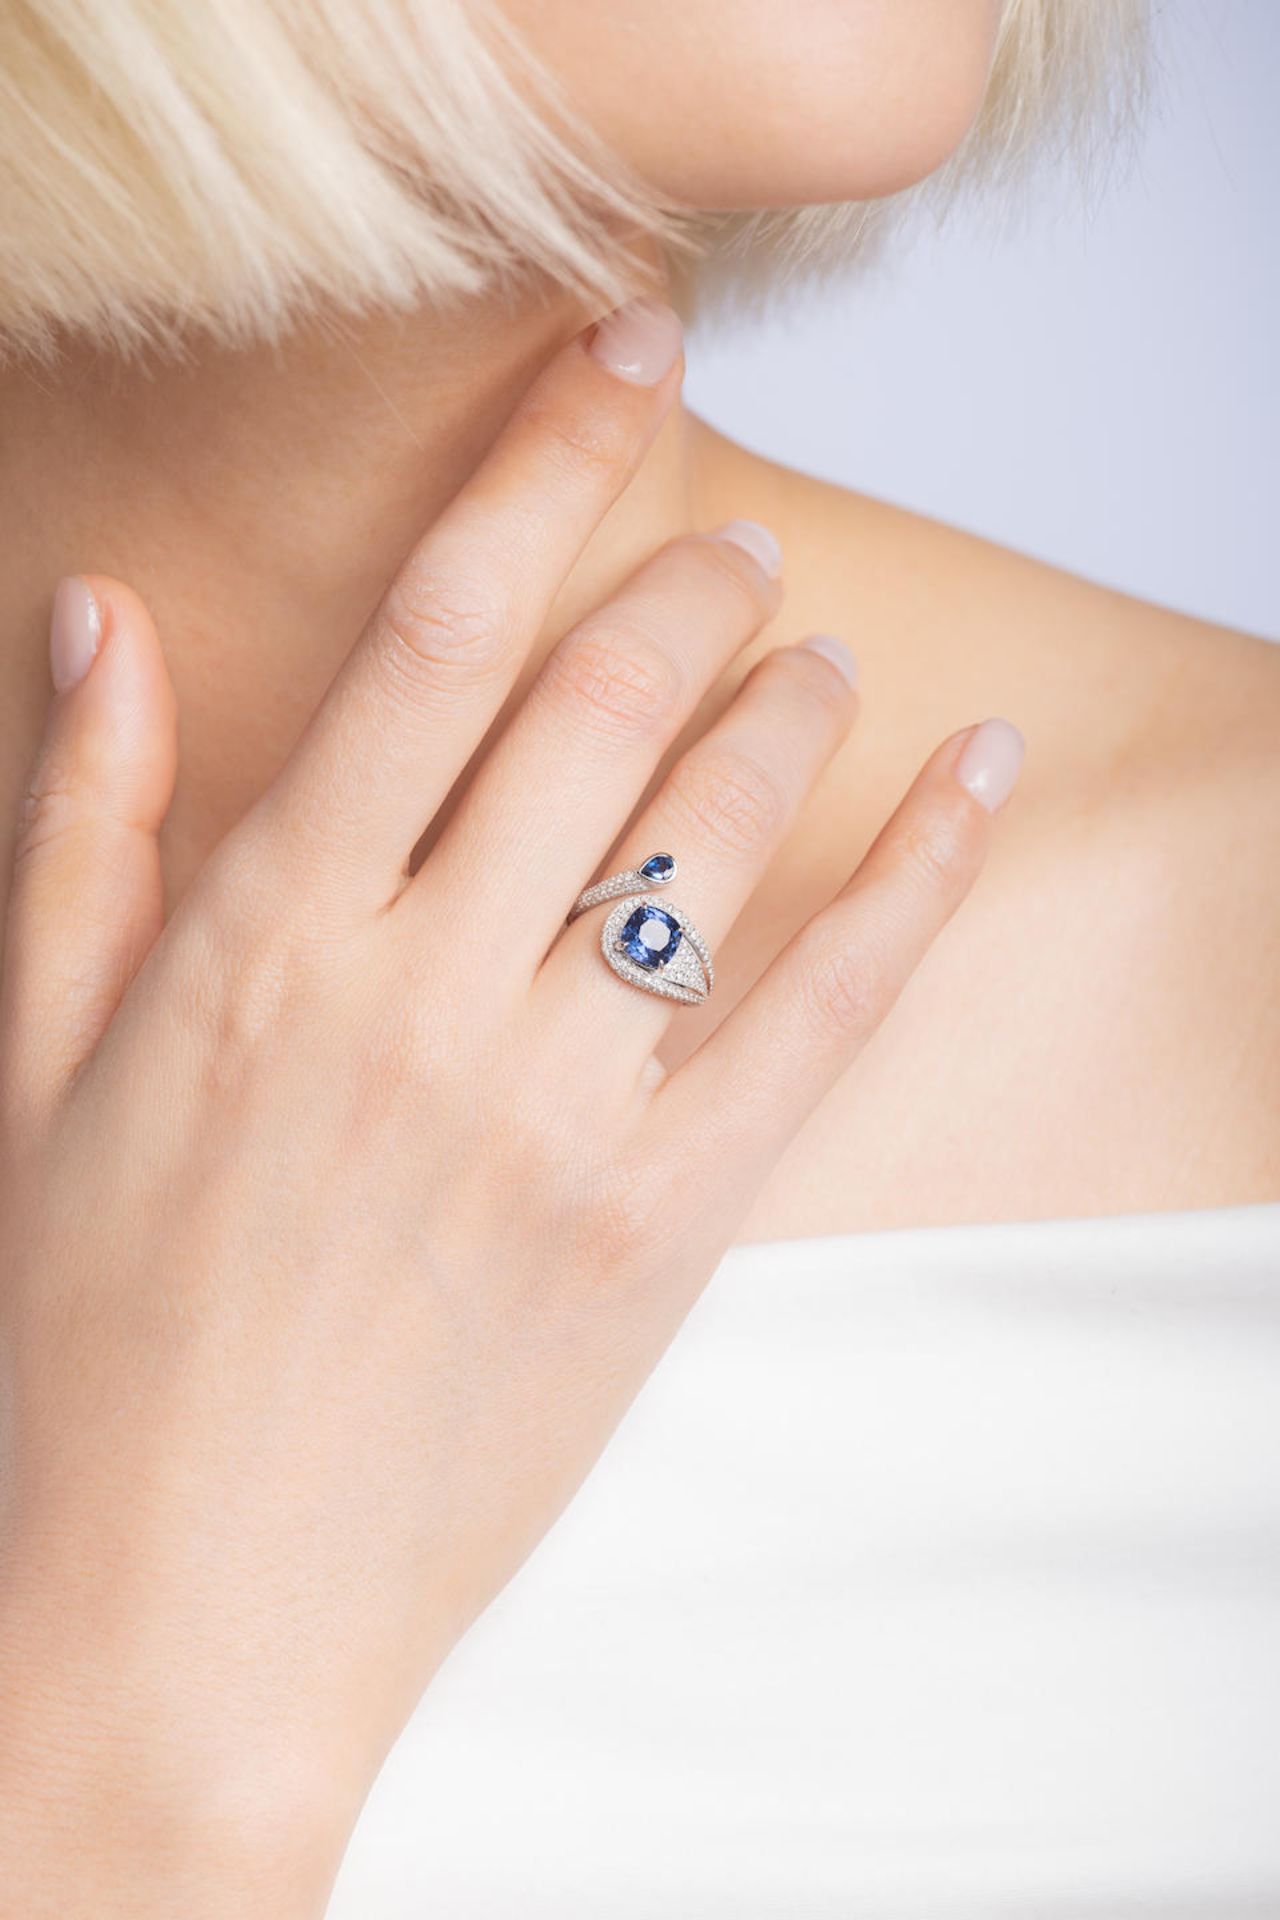 COLOUR-CHANGE BLUE SPINEL, SAPPHIRE AND DIAMOND RING - Image 4 of 4